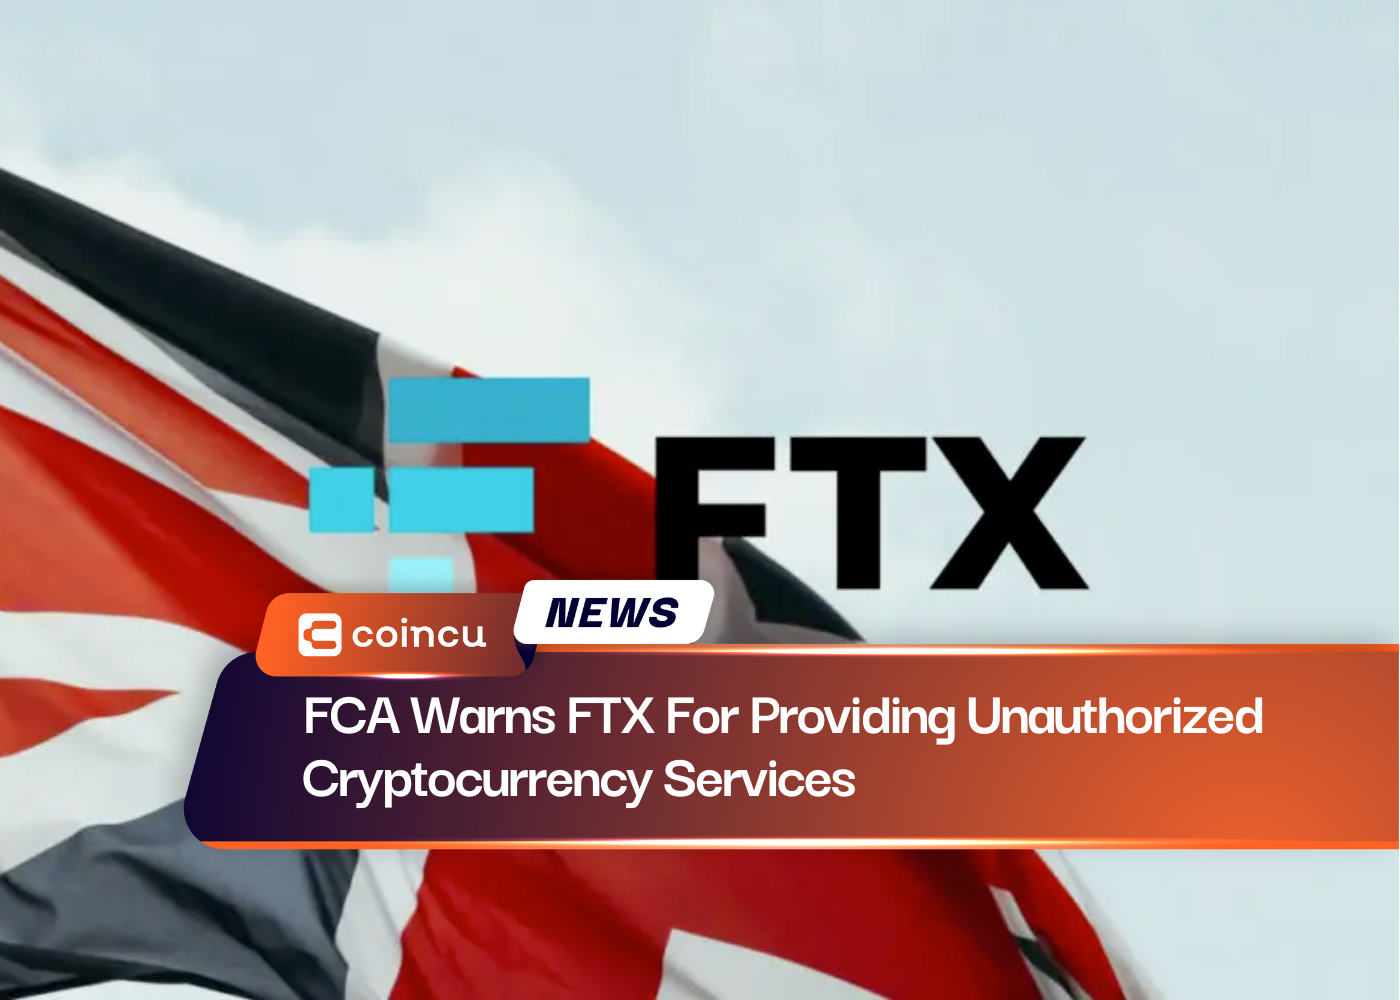 FCA Warns FTX For Providing Unauthorized Cryptocurrency Services